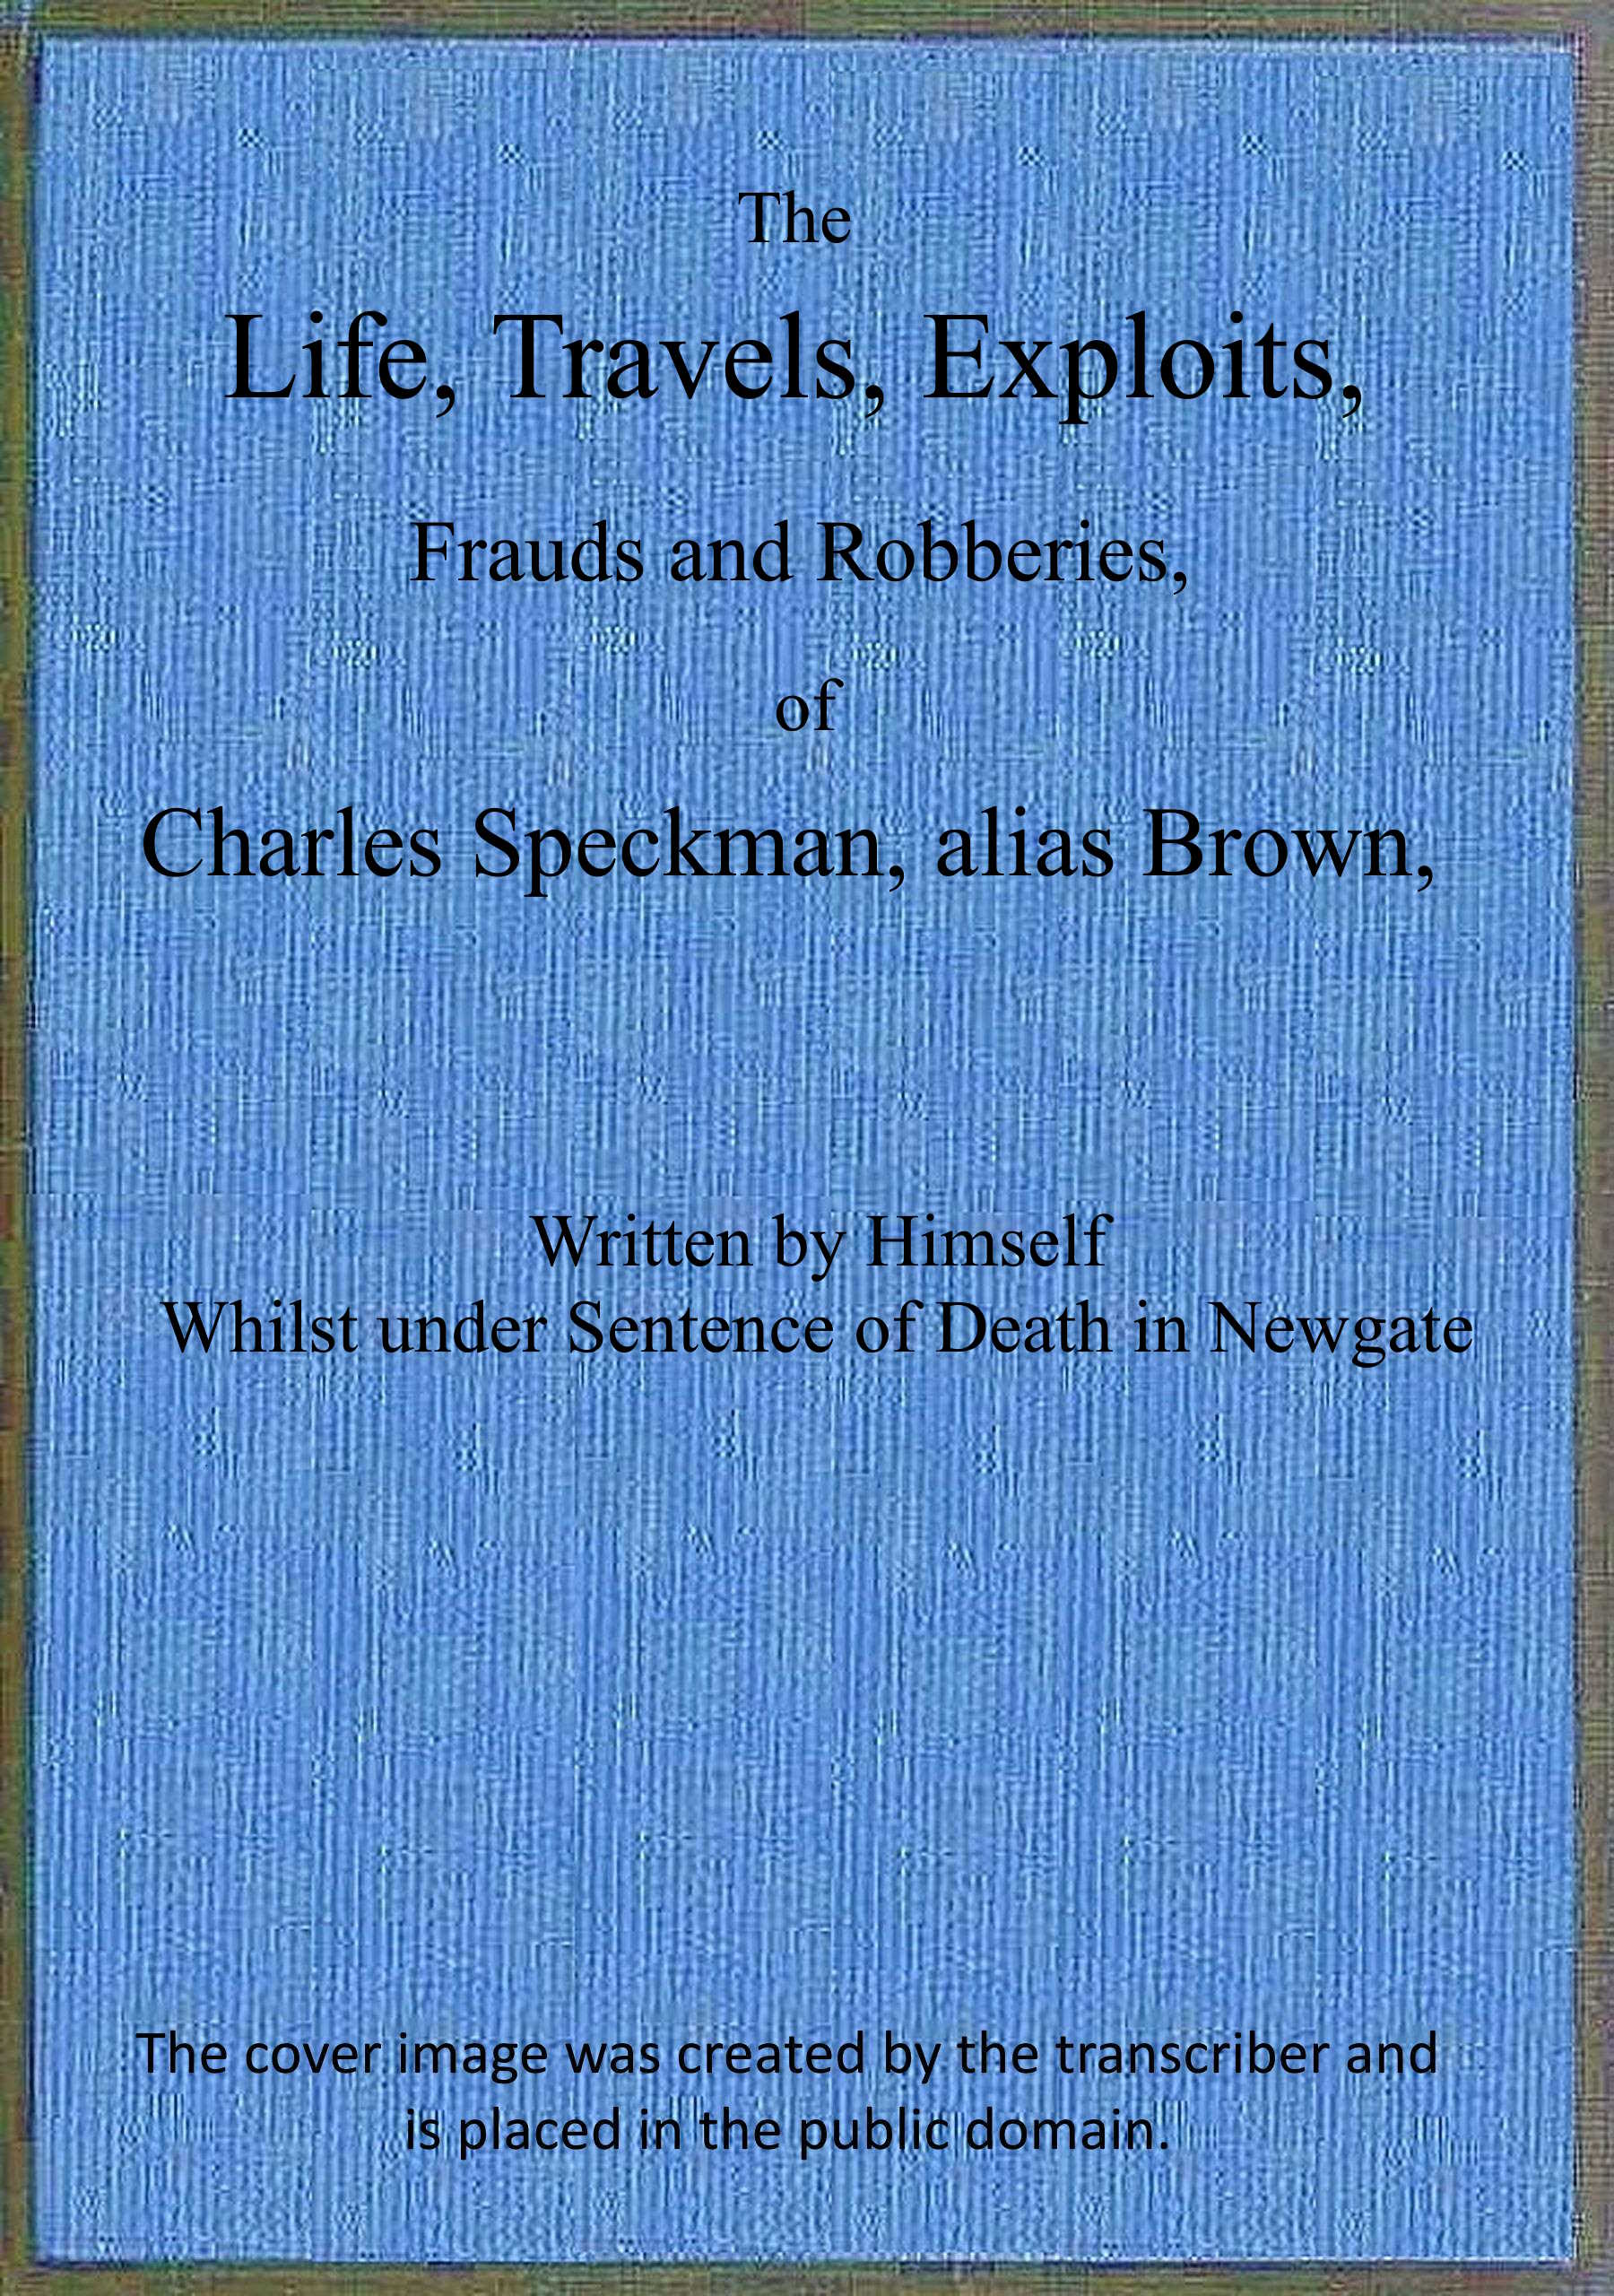 The Life, Travels, Exploits, Frauds and Robberies, of Charles Speckman, alias Brown Project Gutenberg